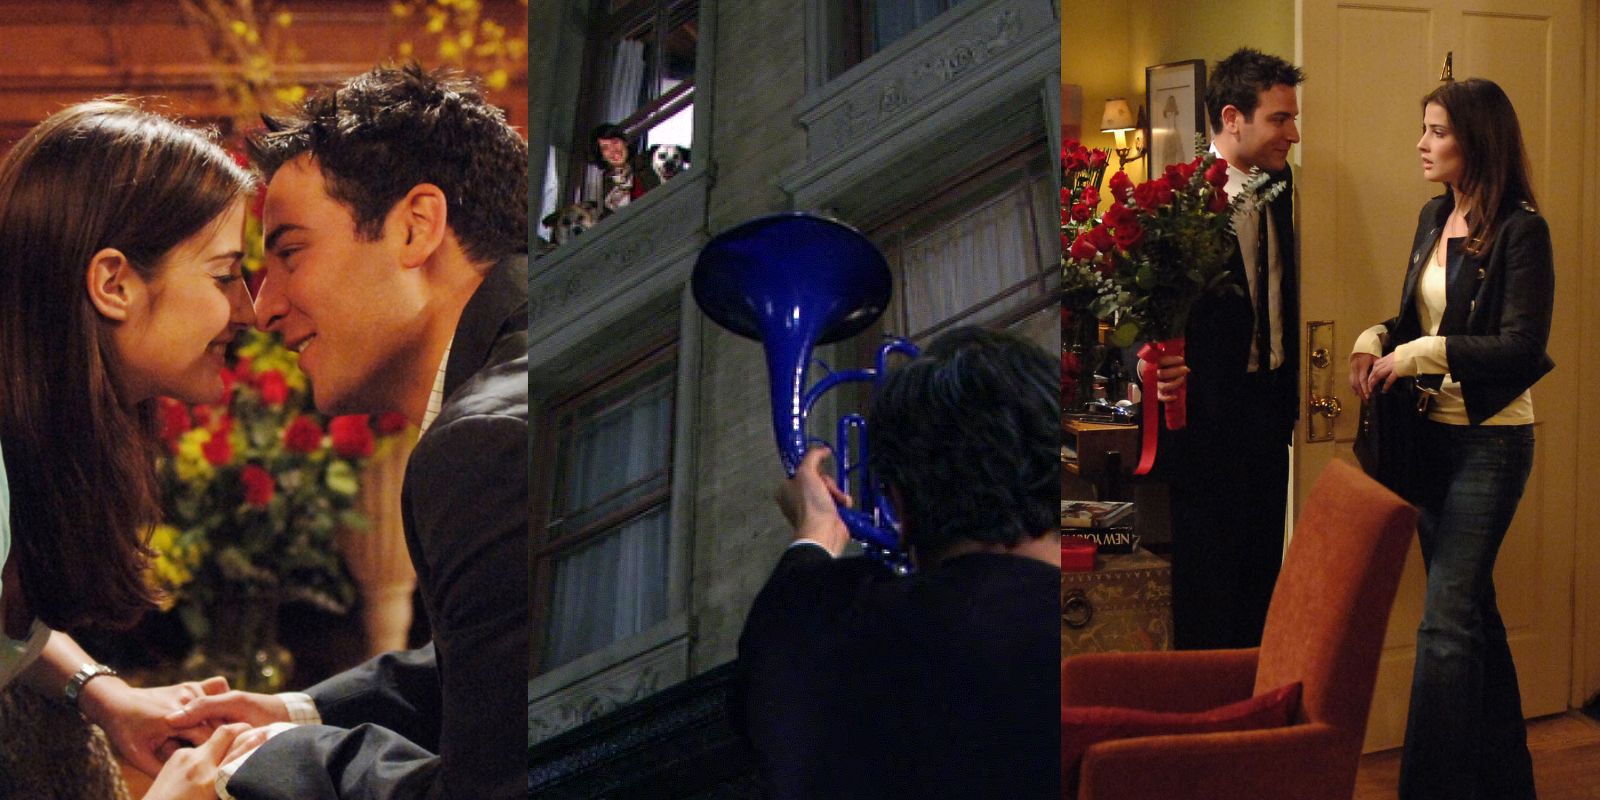 10 Times Ted And Robin Were Relationship Goals in HIMYM